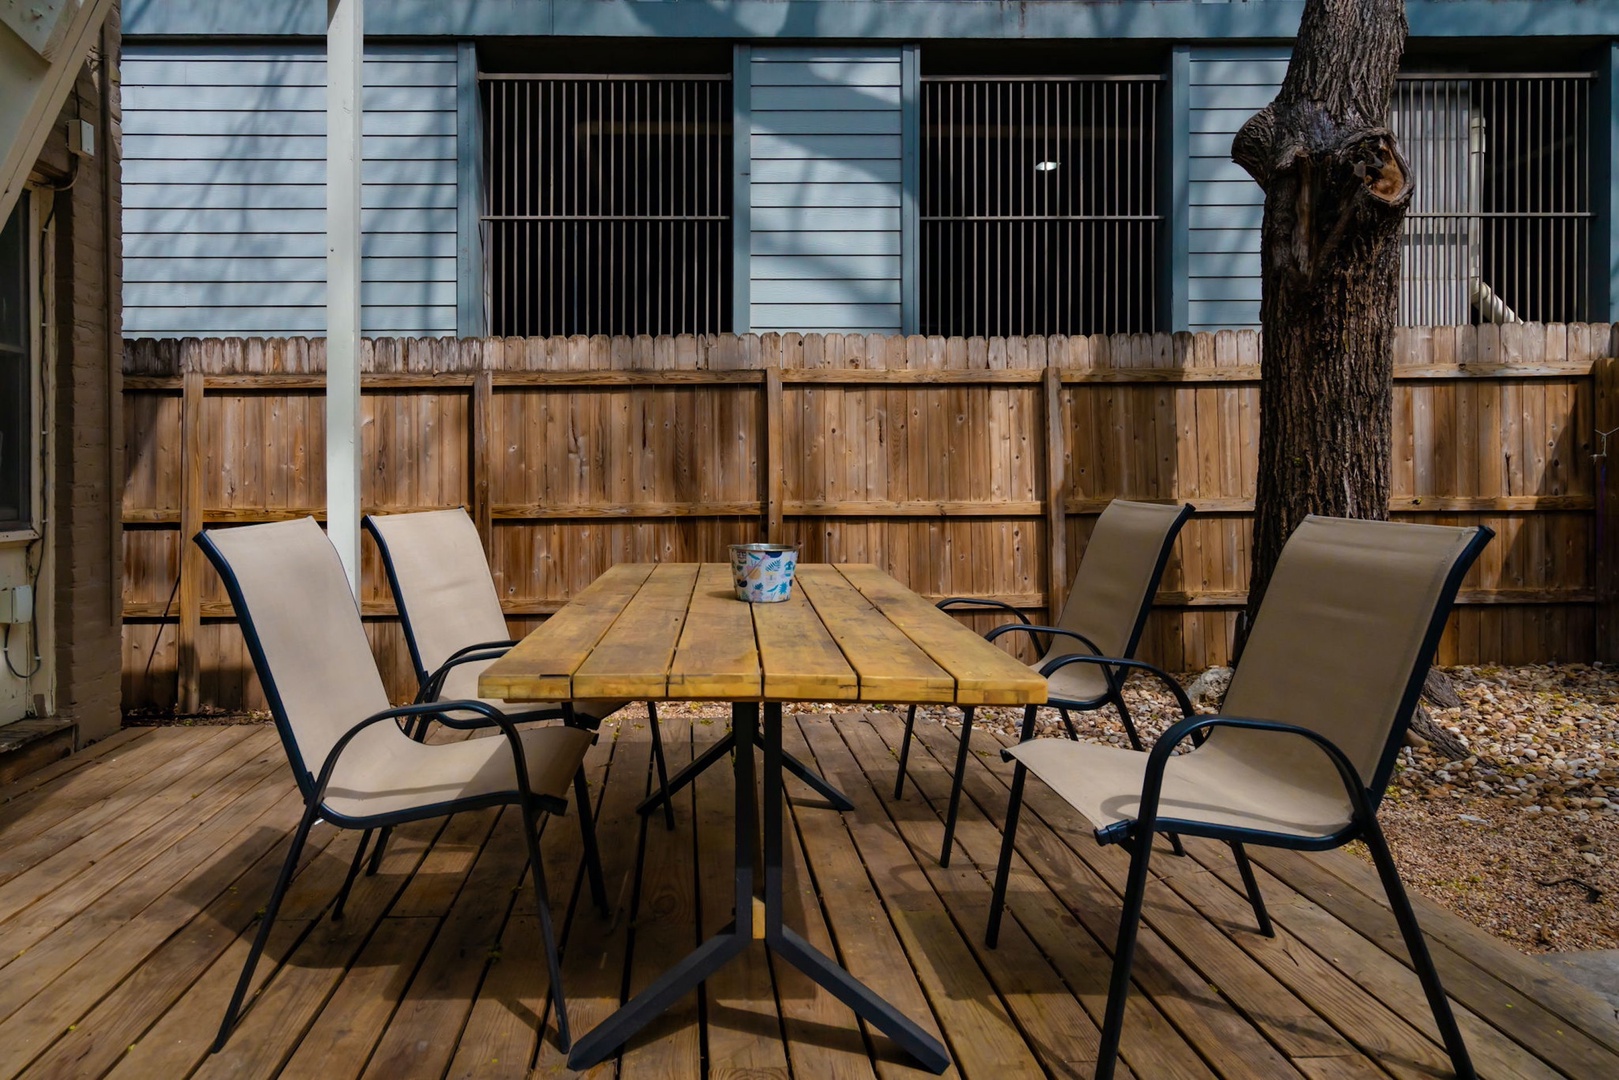 Relax in the fresh air or dine alfresco in the shared back yard space